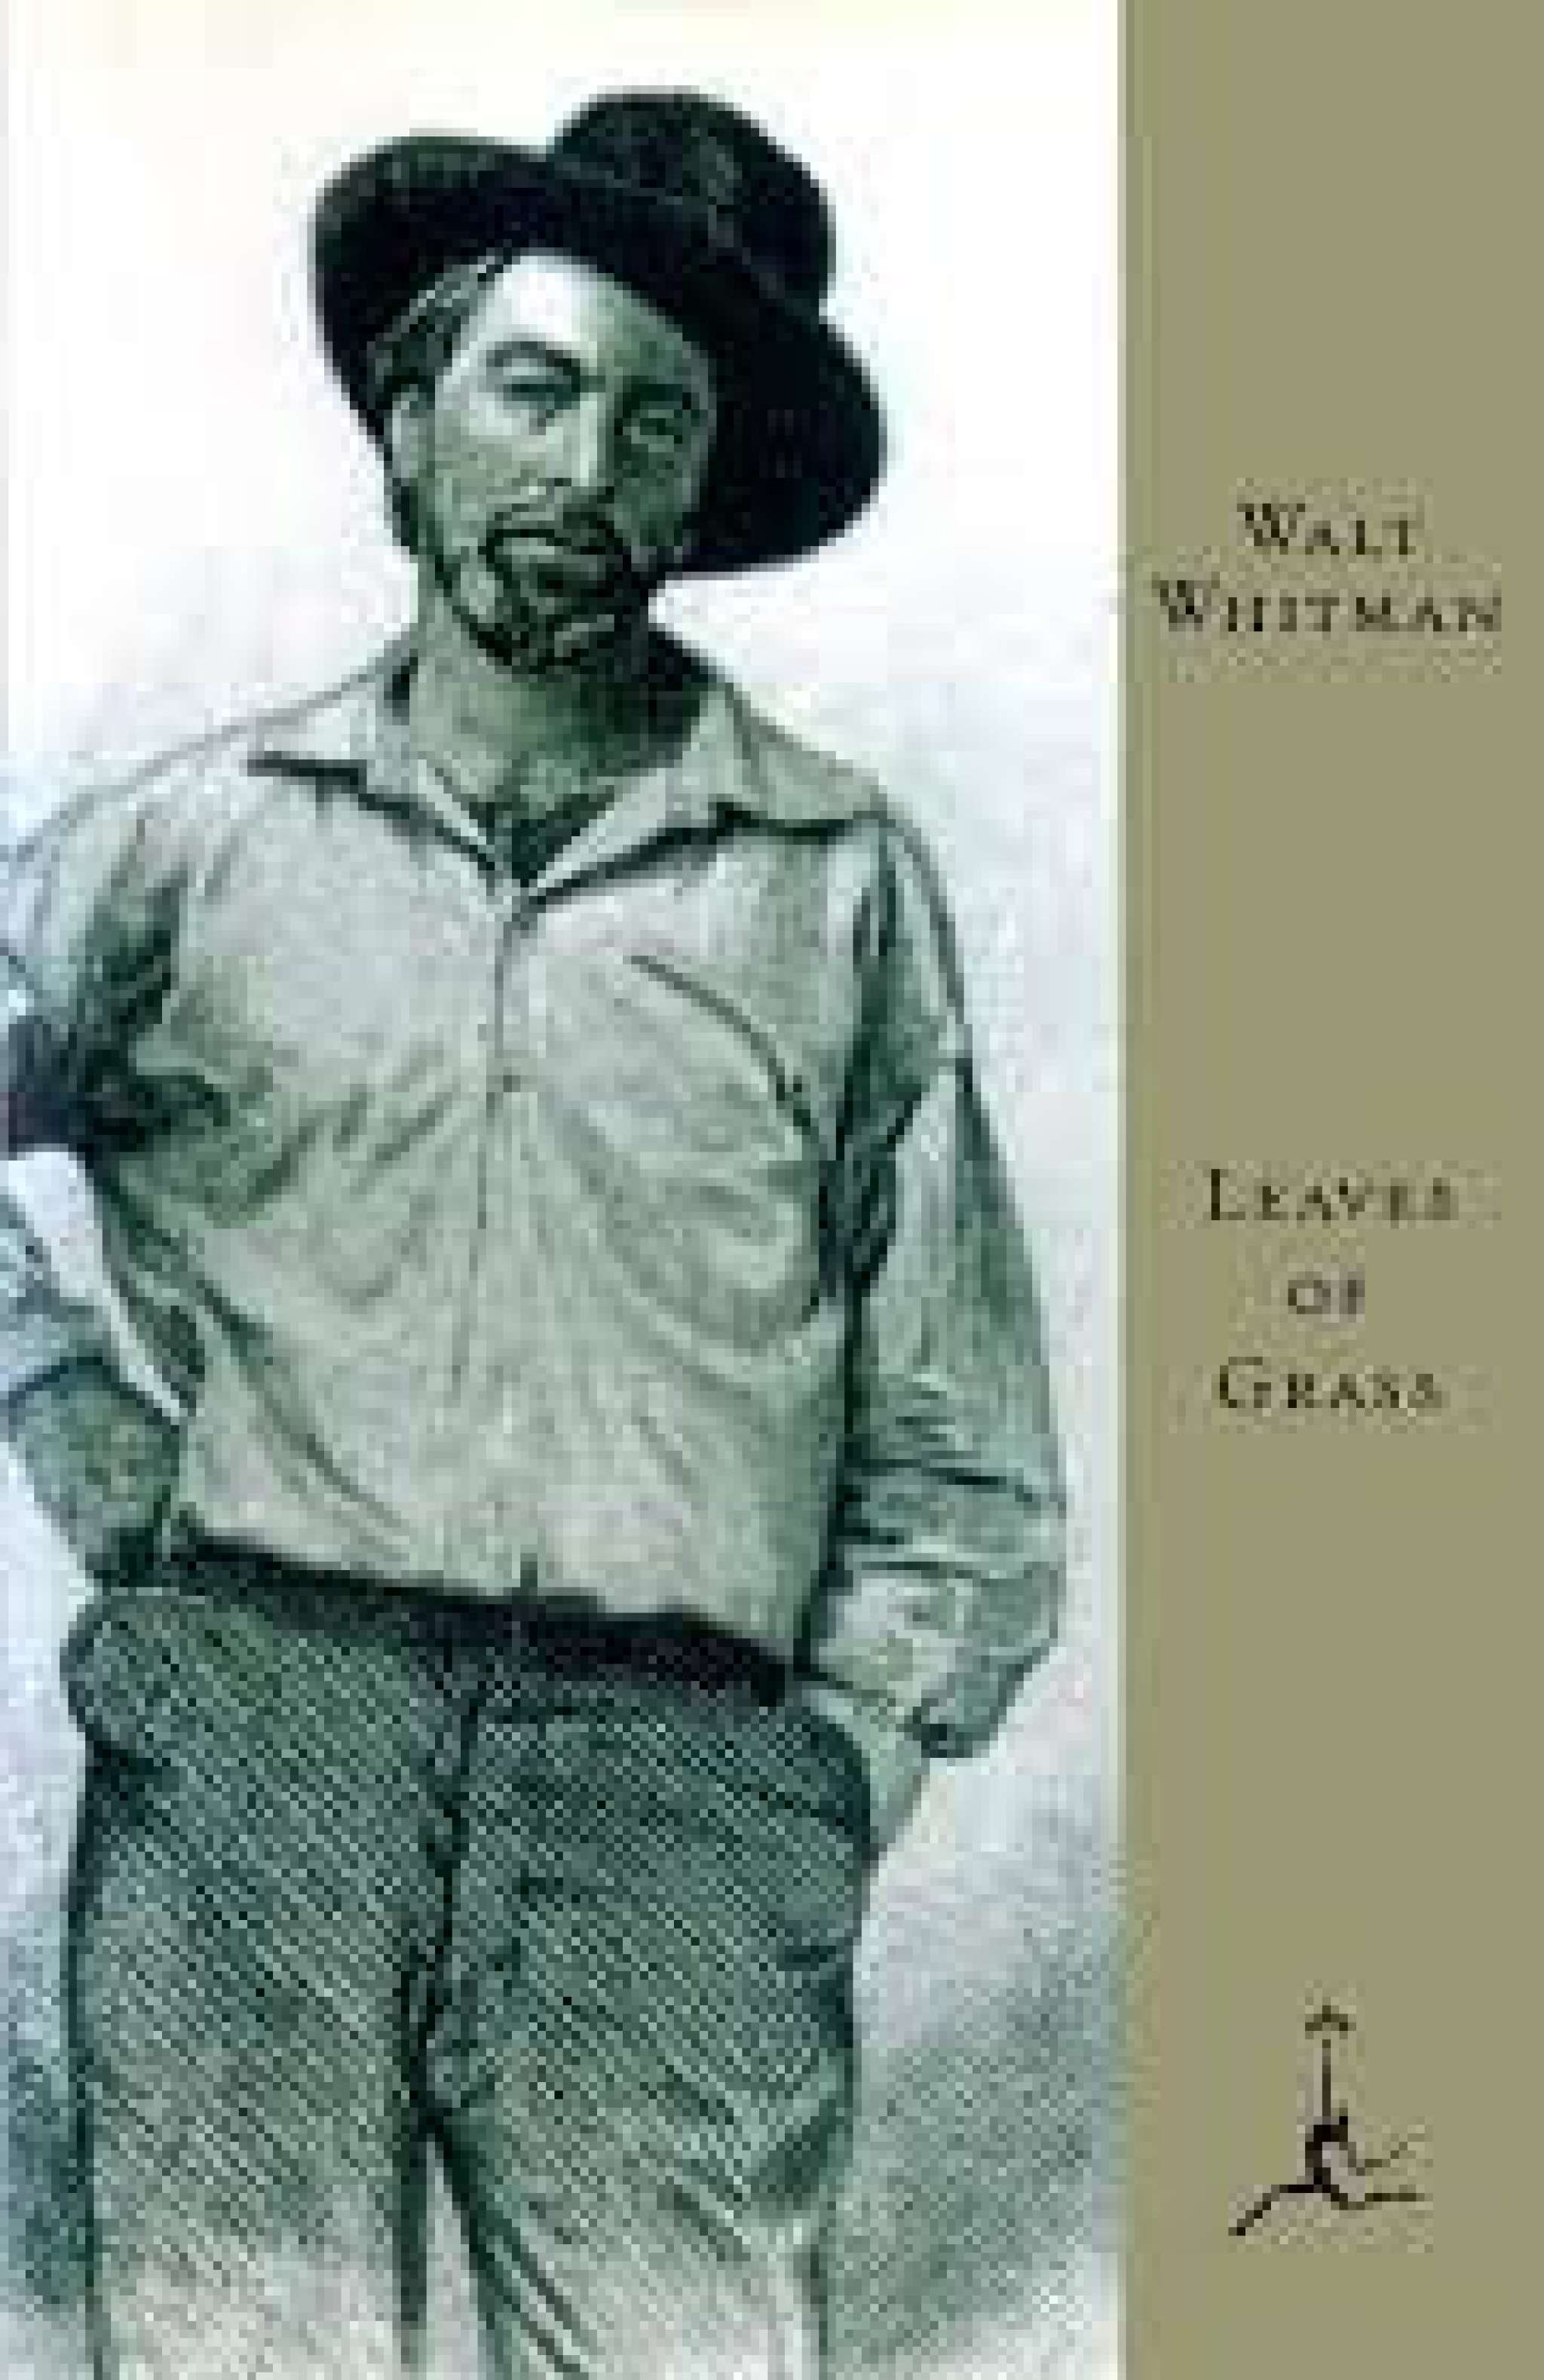 Leaves of grass book.